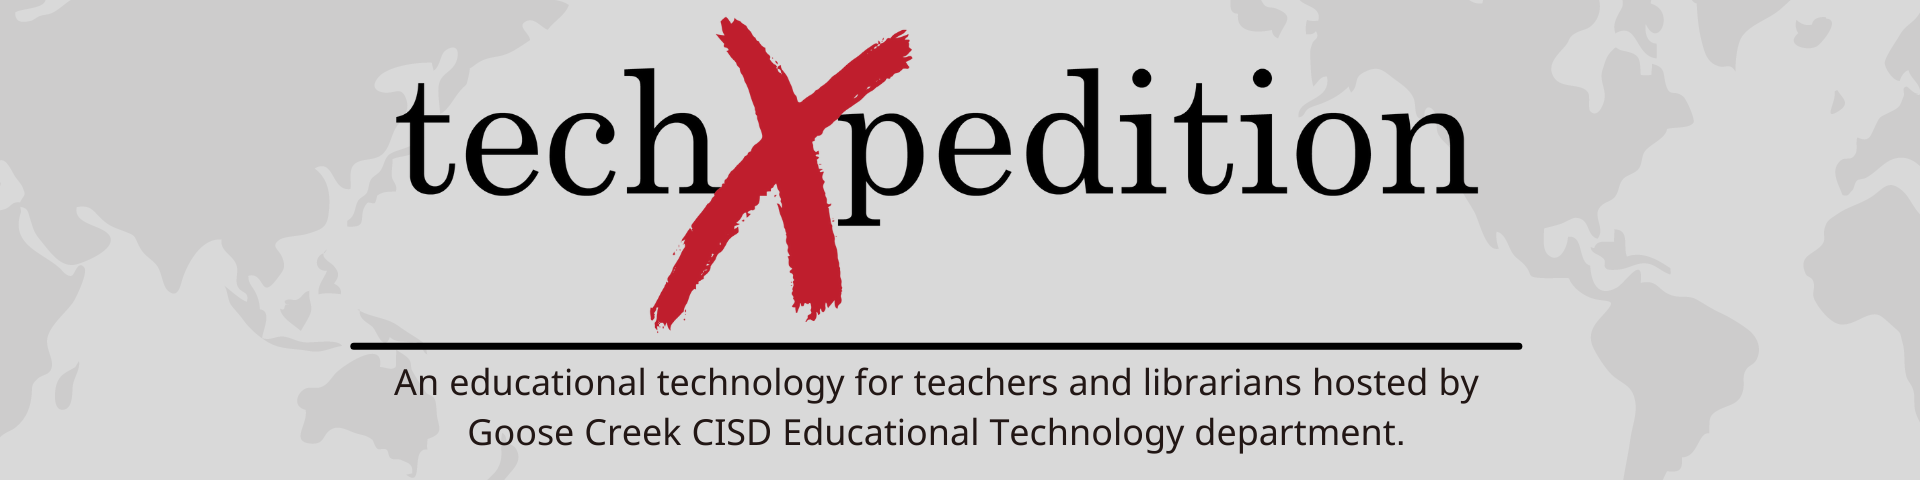 techXpedition - an educational technology conference for teachers & librarians hosted by Goose Creek CISD Educational Technology department.